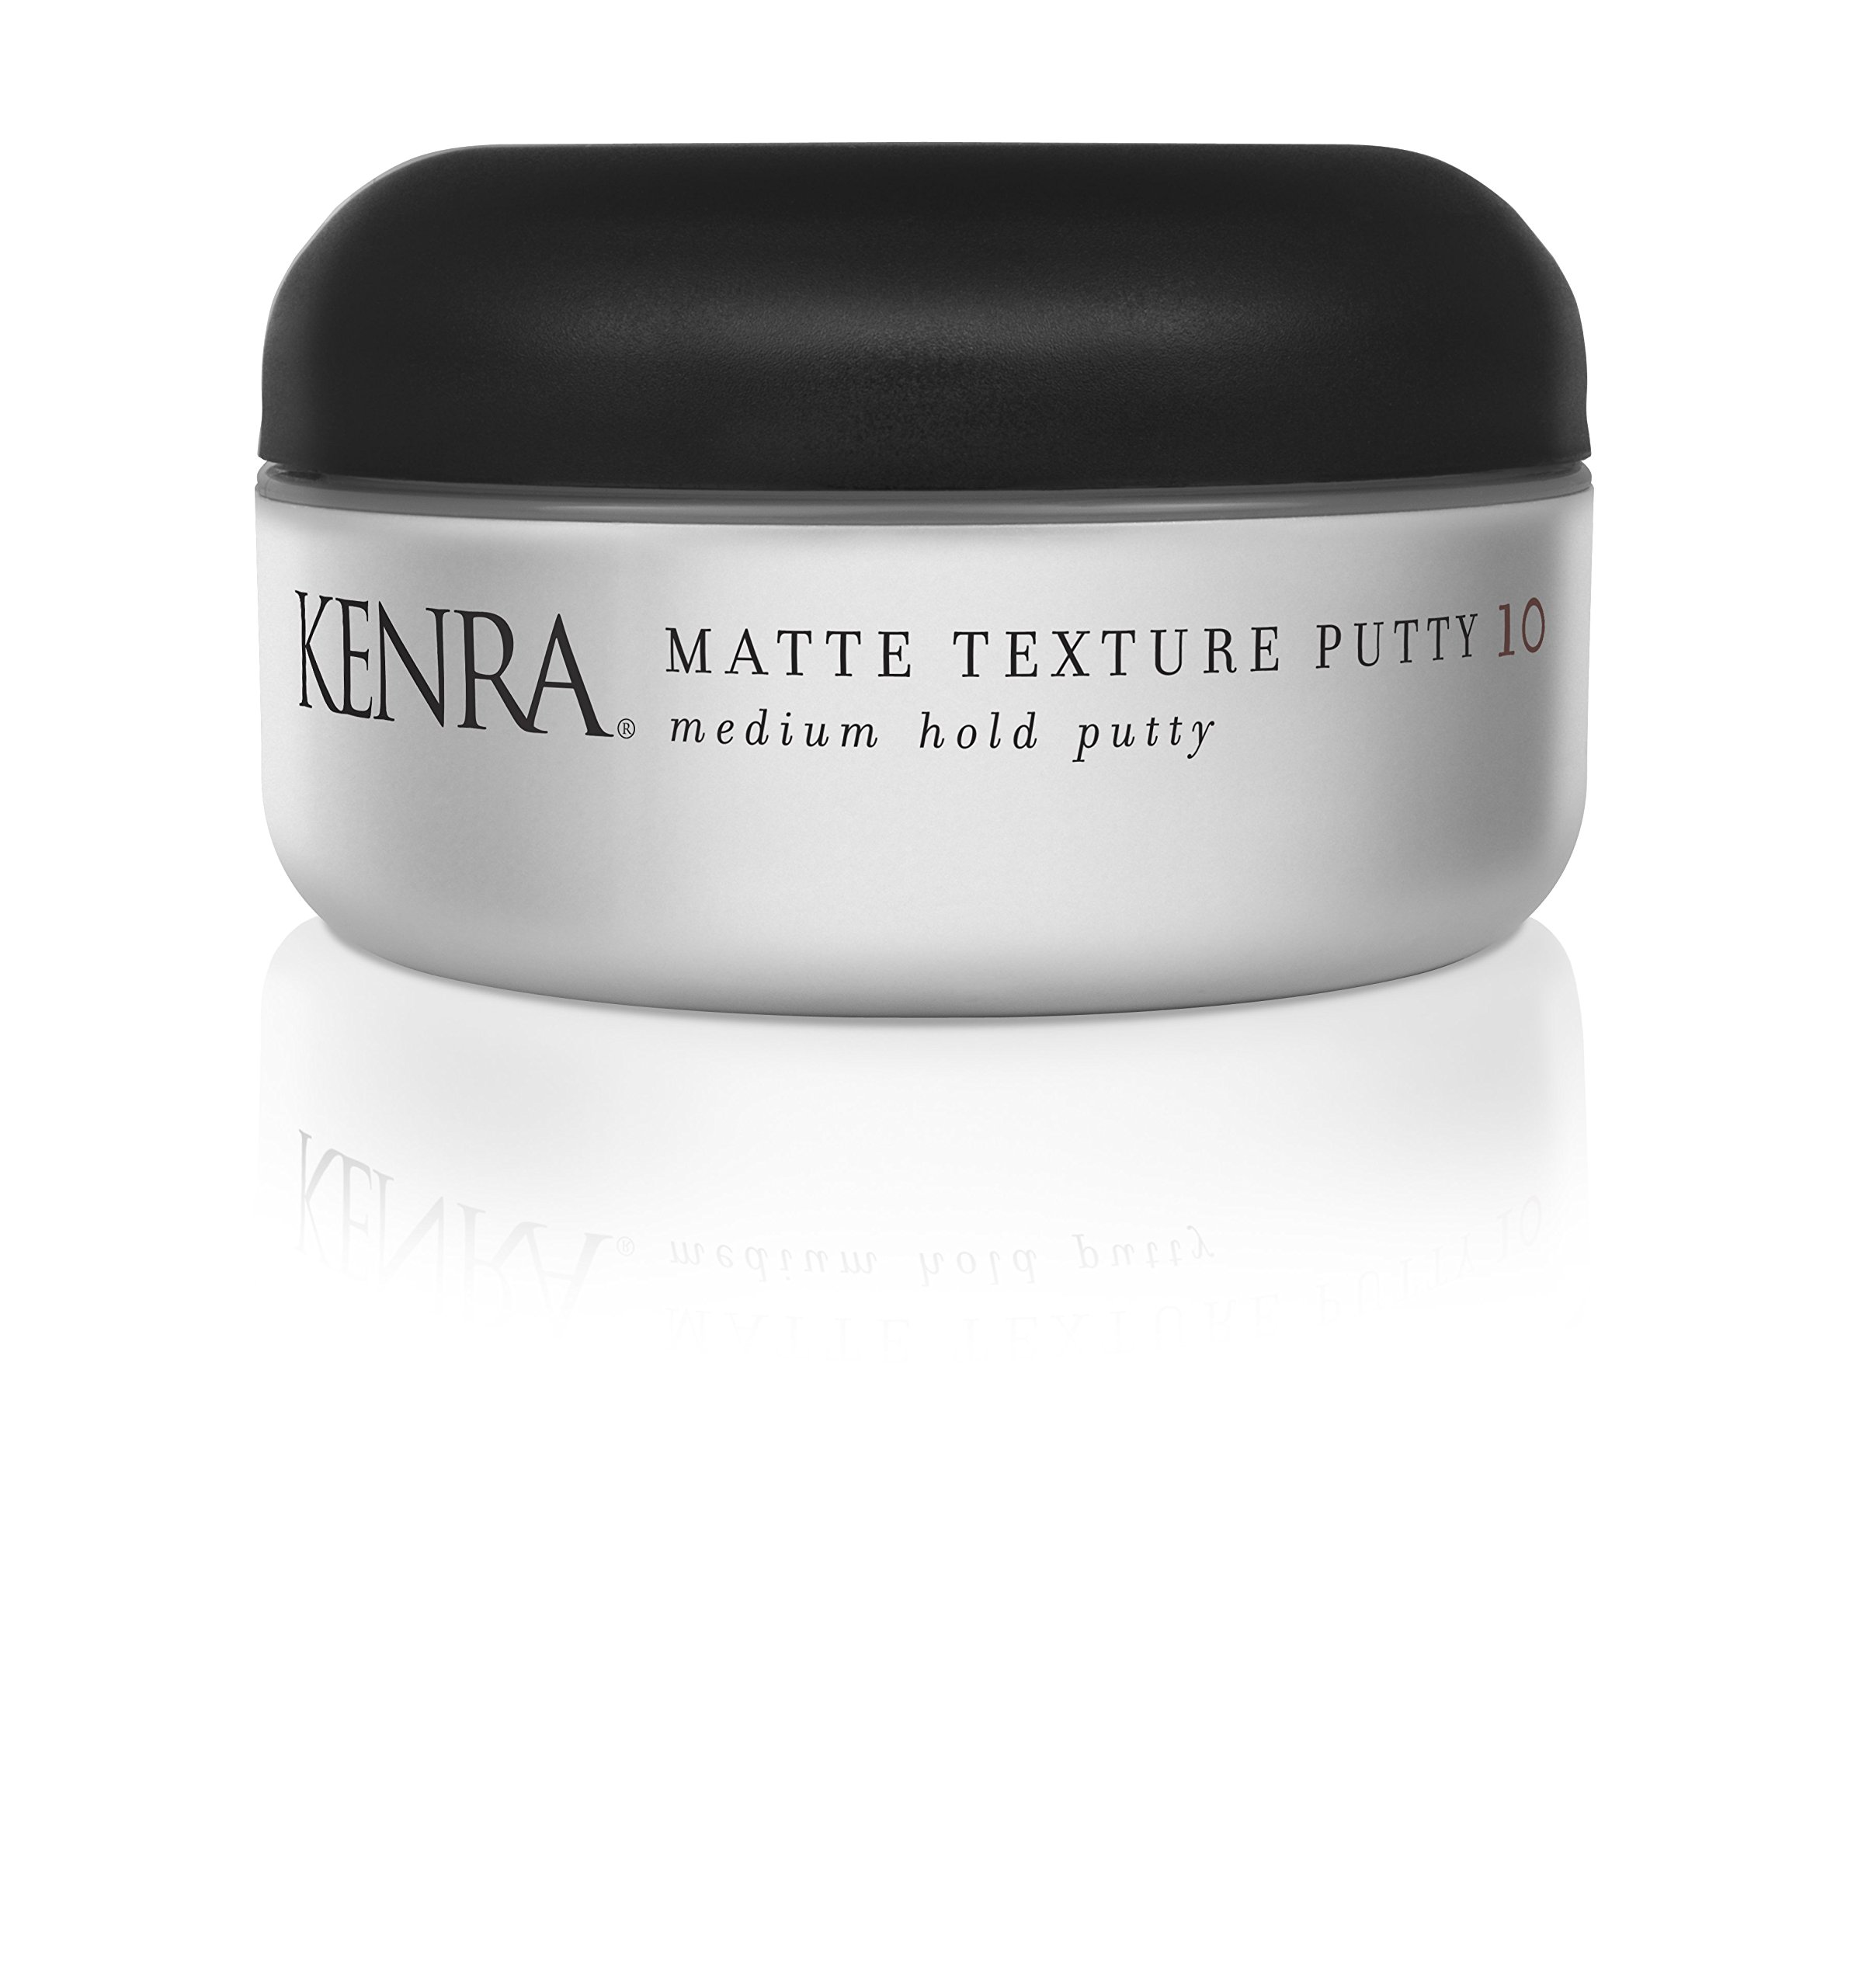 Kenra Matte Texture Putty 10 | Medium Hold Styler | Flexible Hold With A Matte Finish | Replenishes Moisutre & Softens Hair | All Hair Types